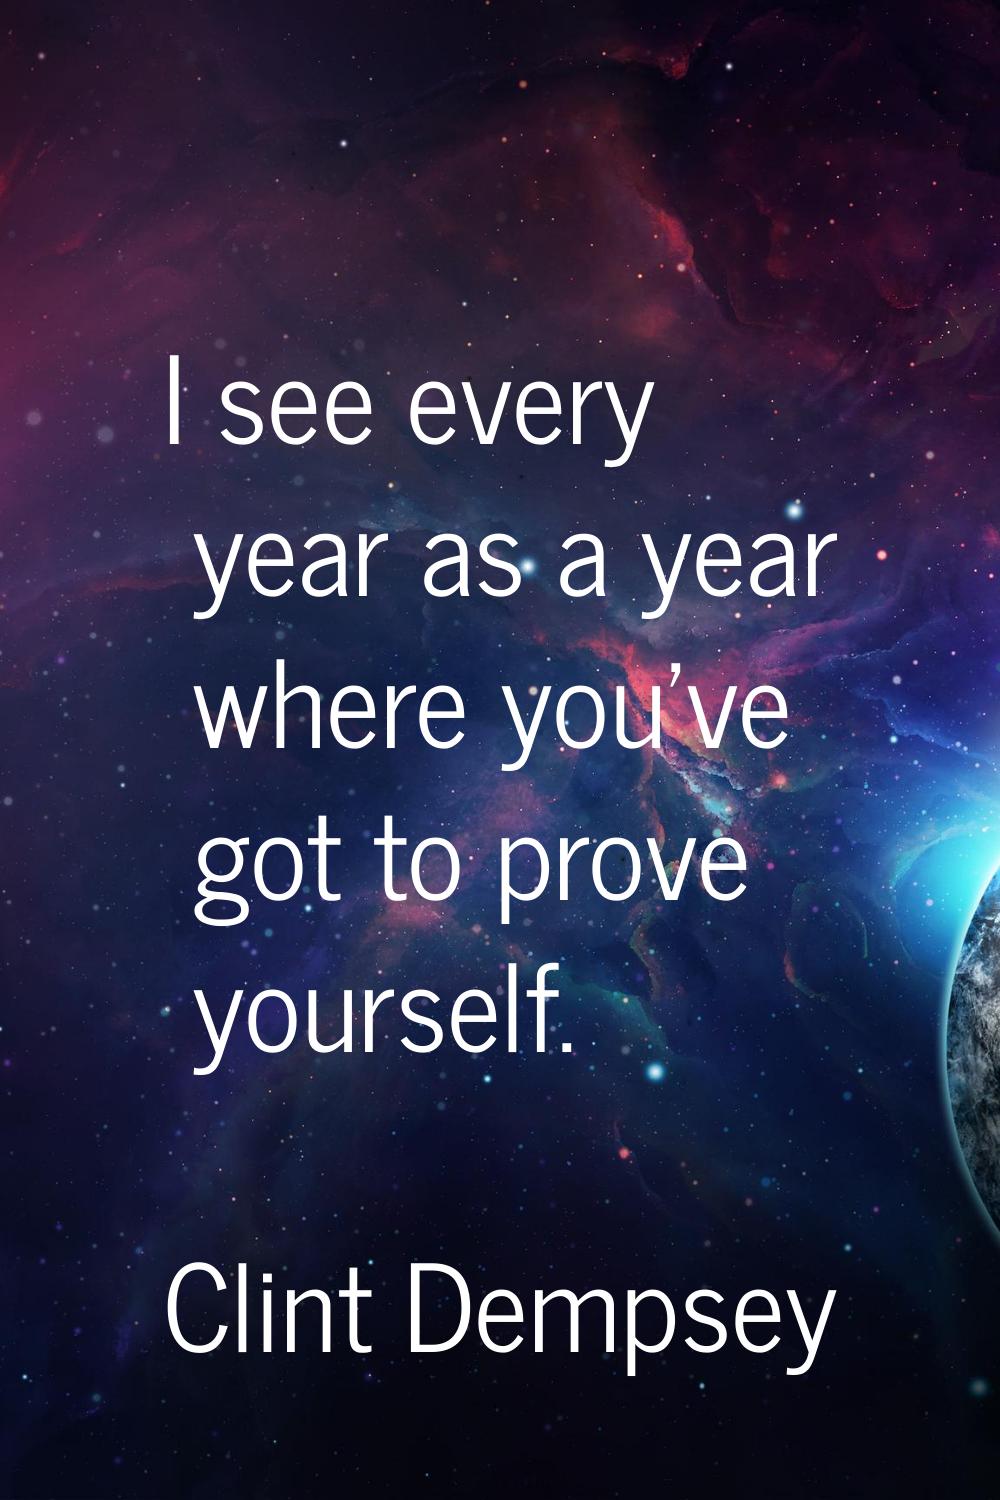 I see every year as a year where you've got to prove yourself.